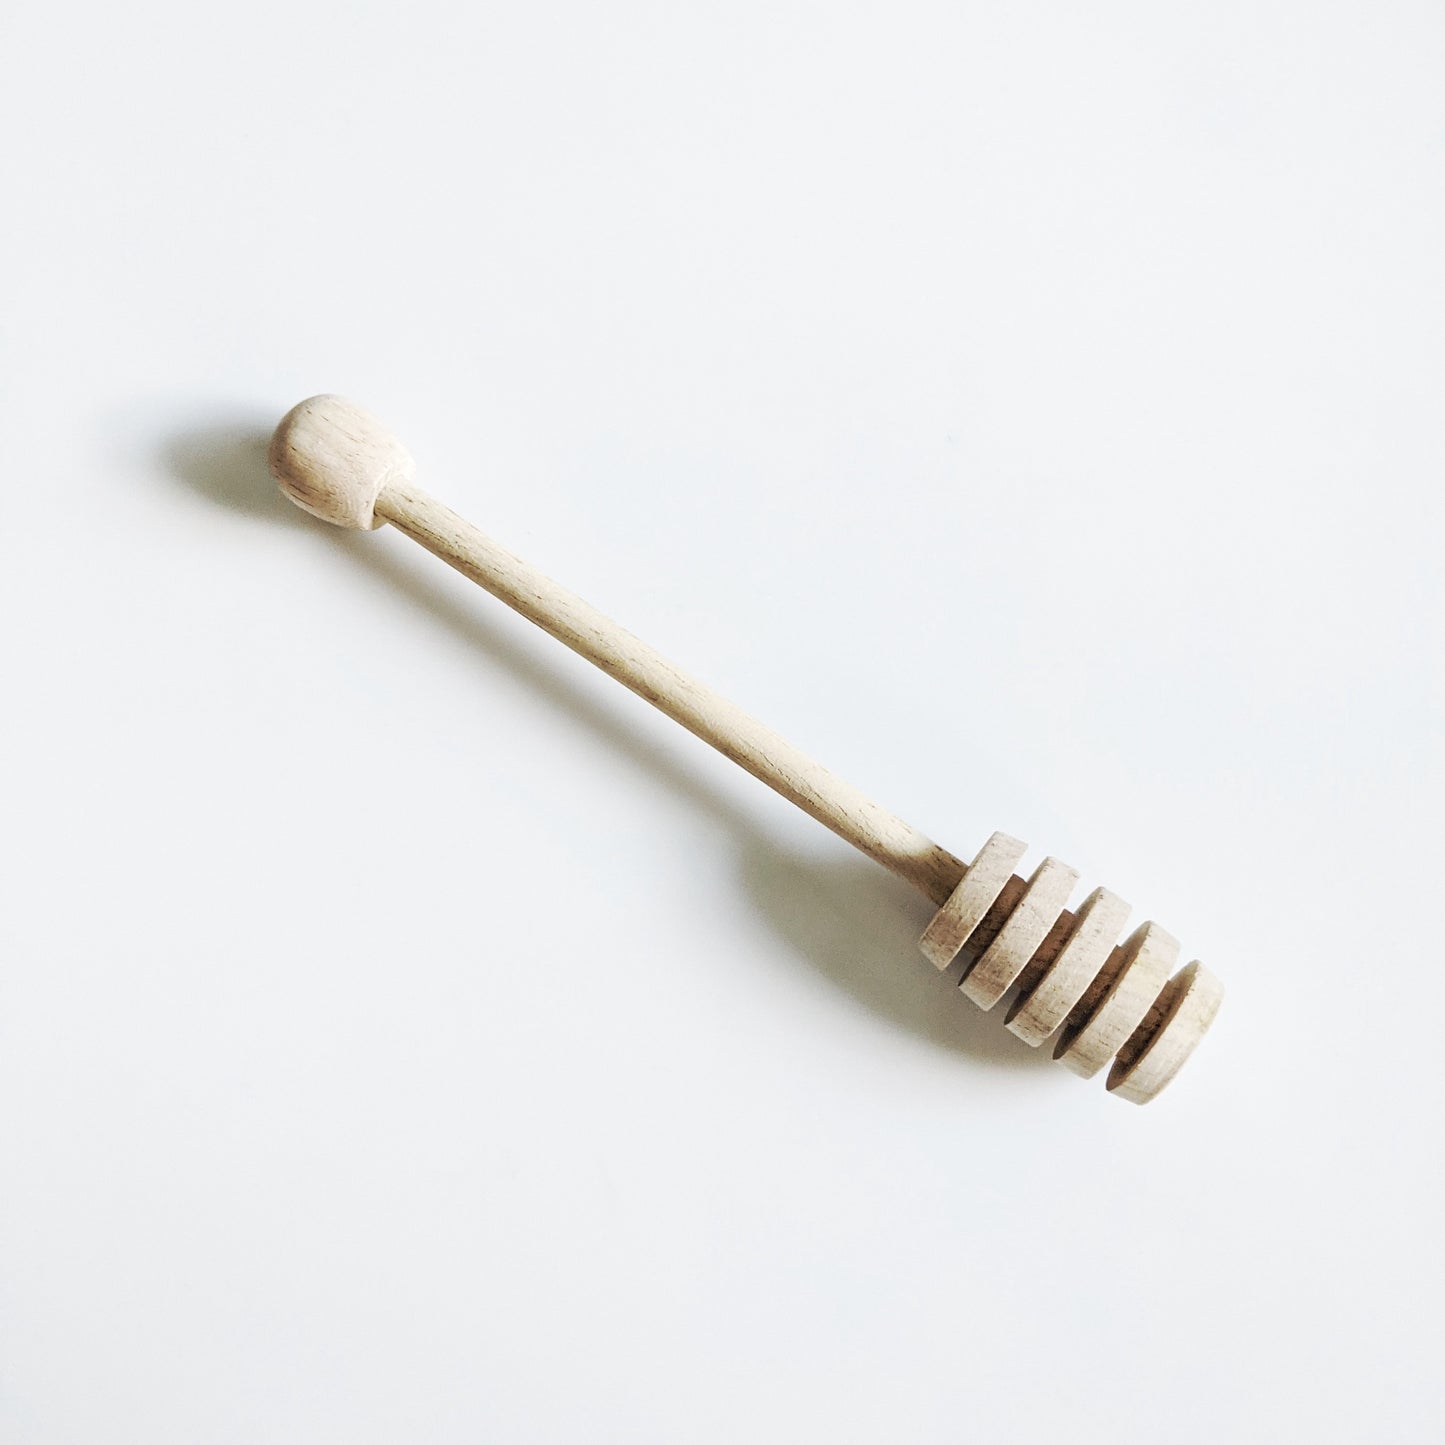 A traditional wooden honey dipper with a grooved top to collect honey. 